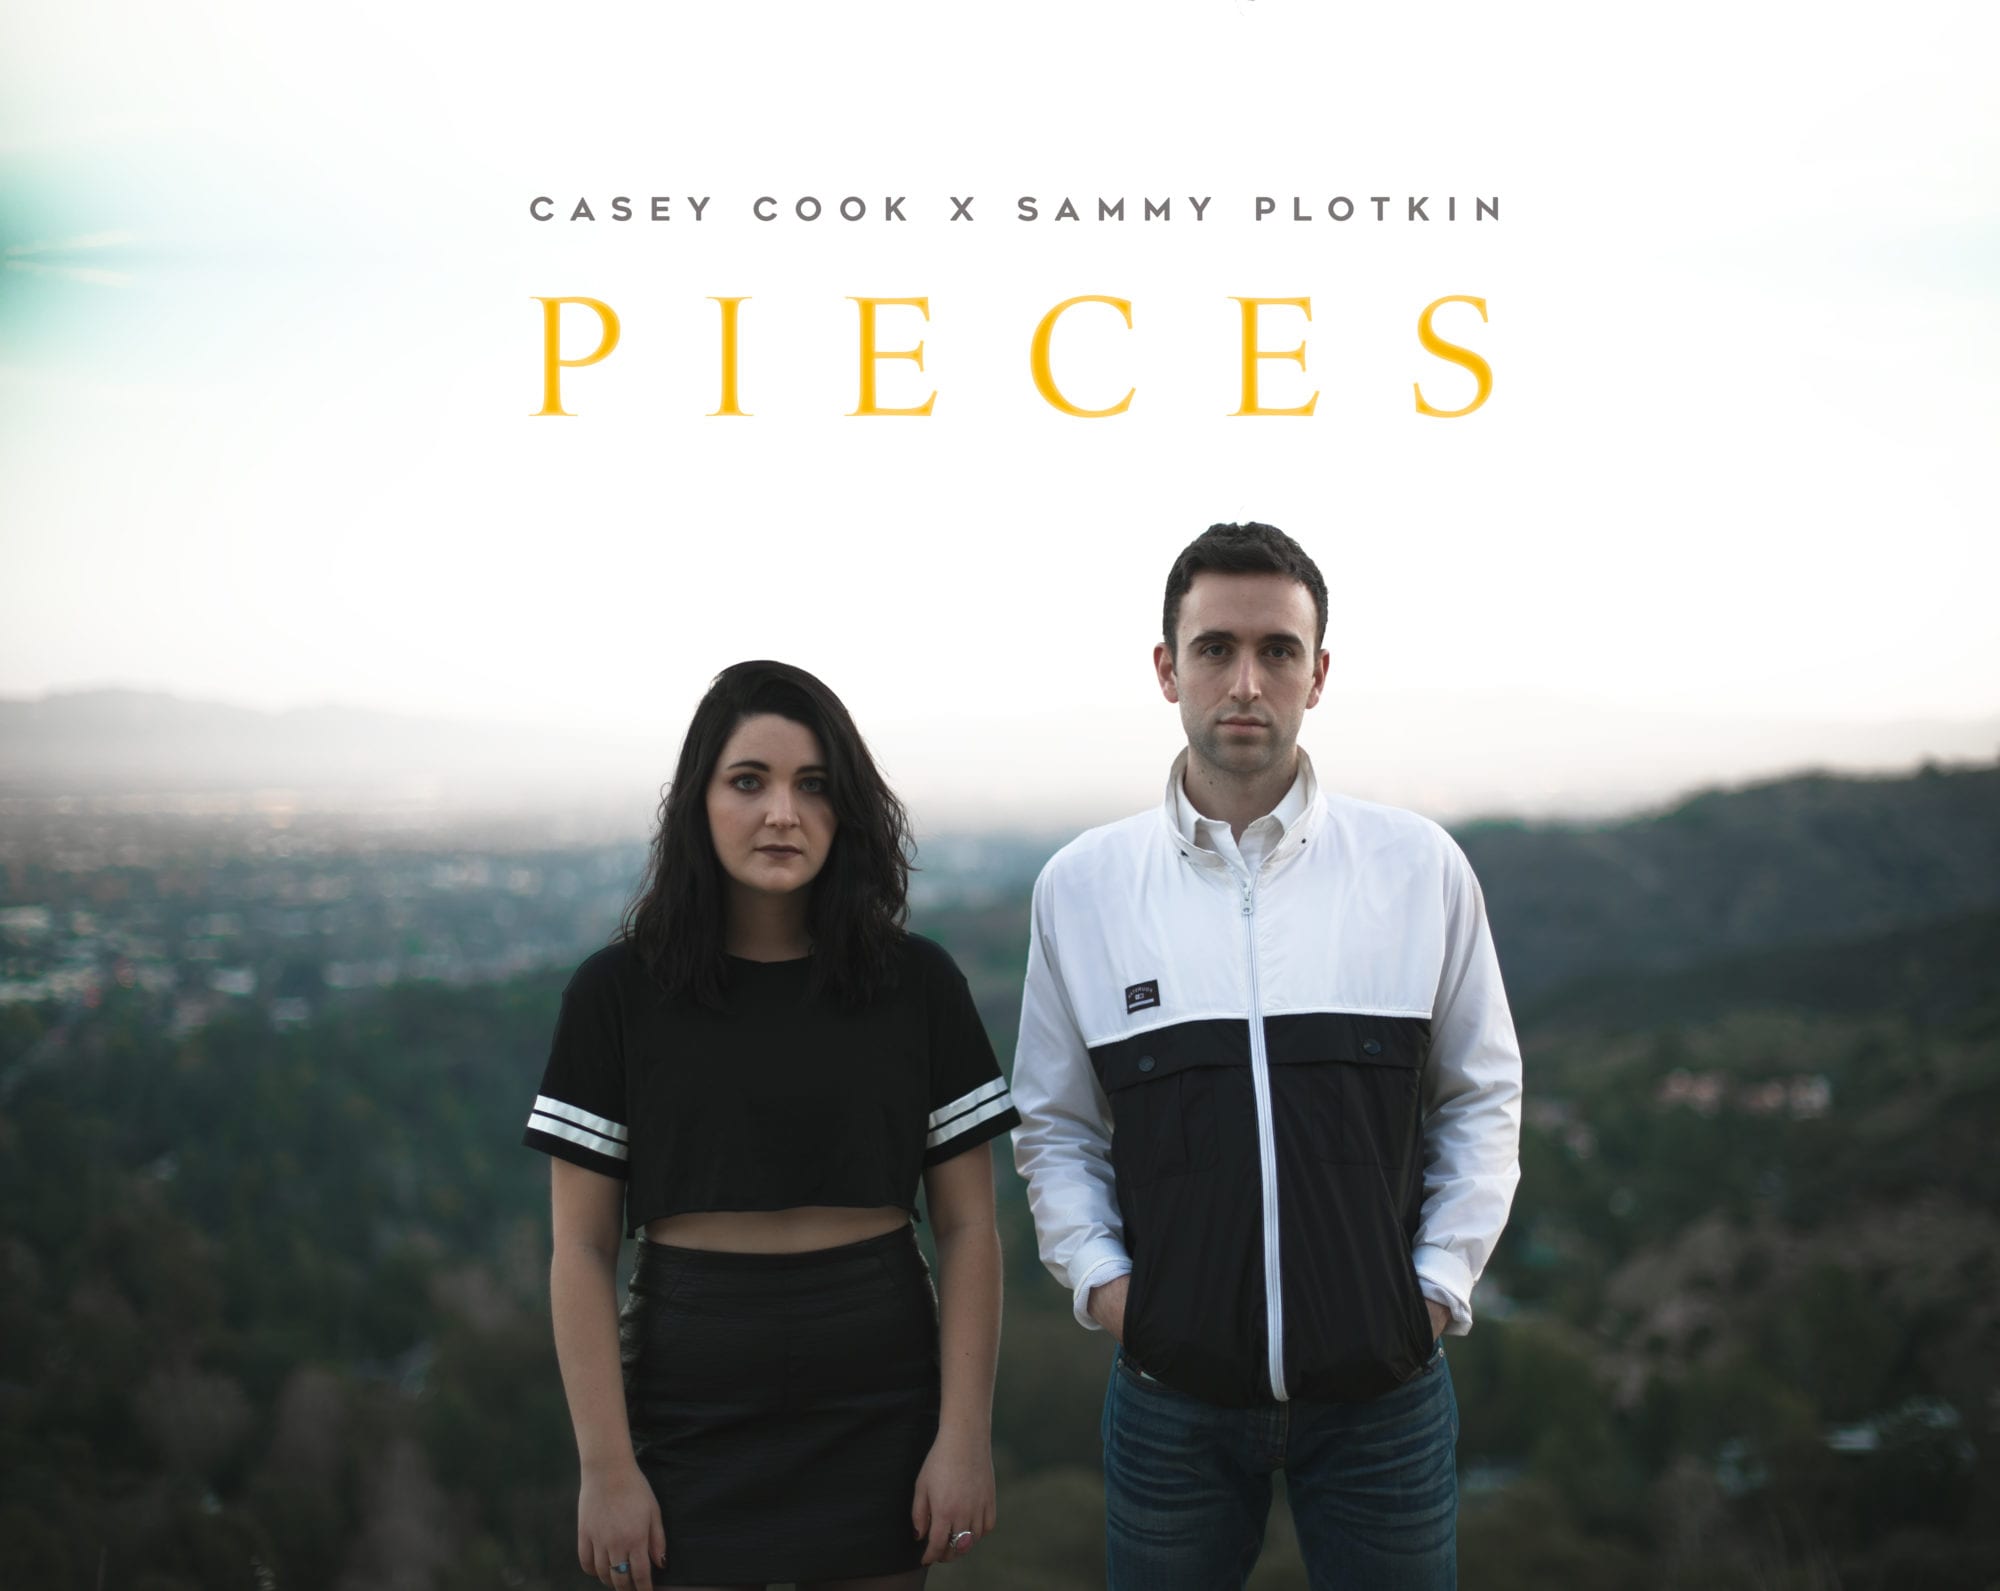 Cover art for "Pieces" with Sammy Plotkin